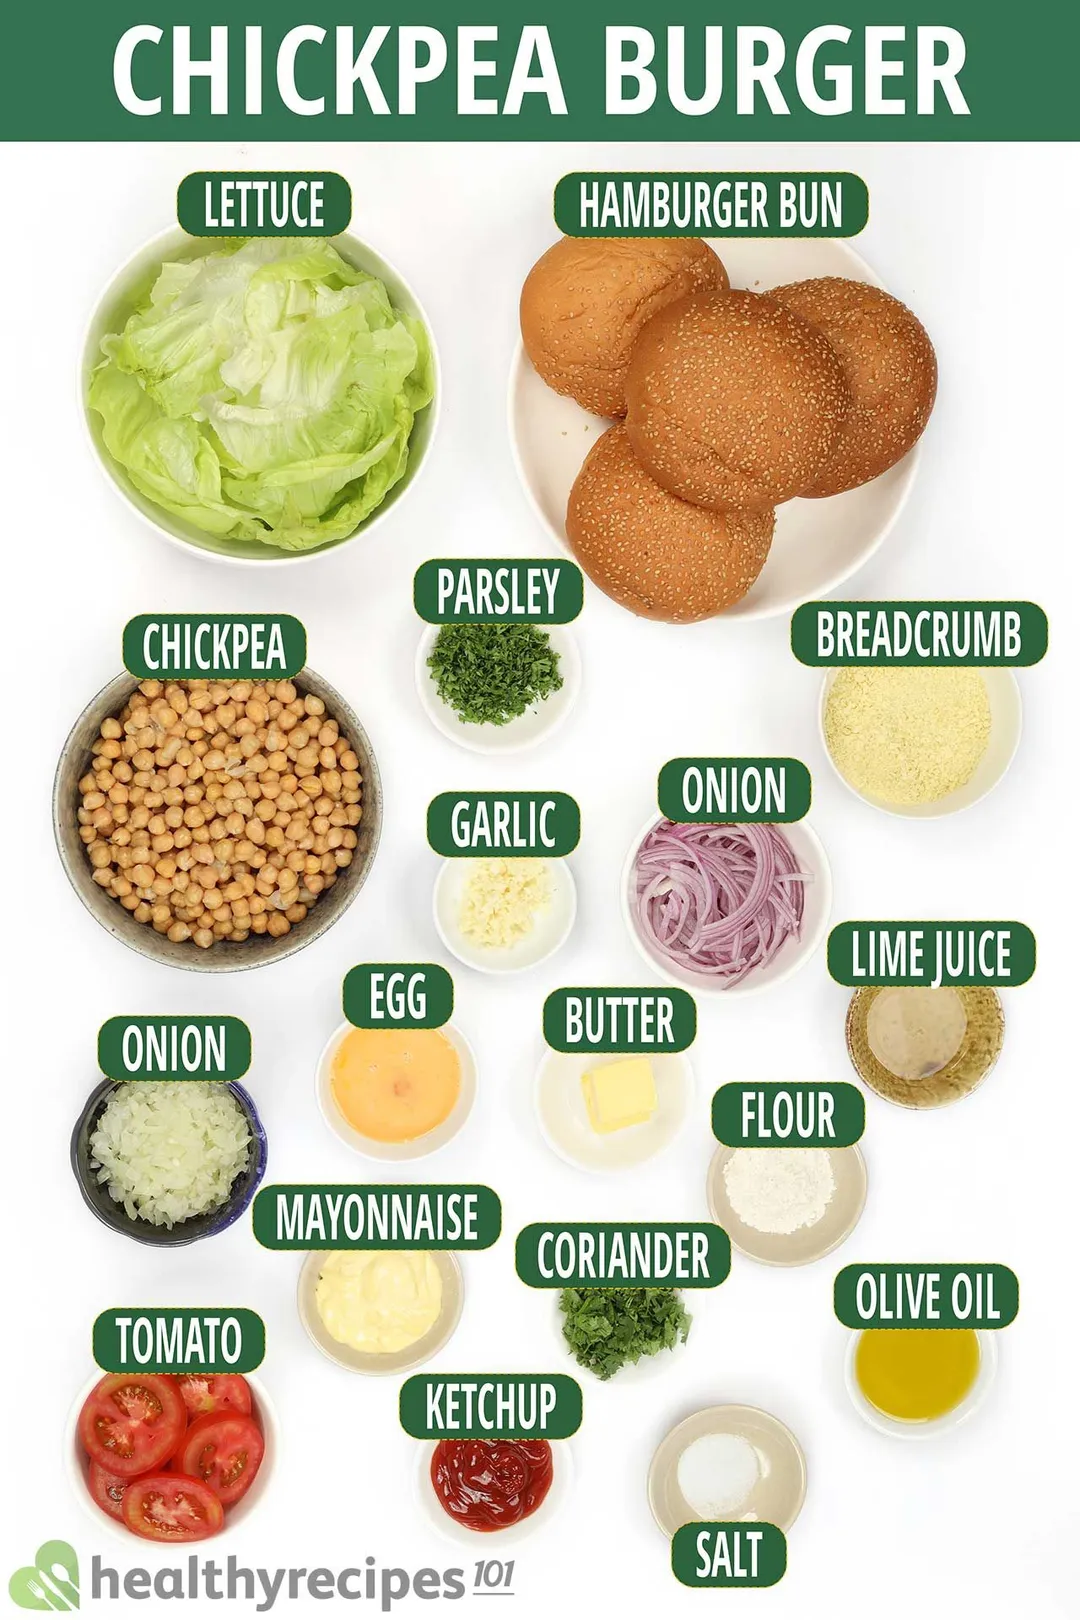 Ingredients for chickpea burger, including burger buns, fresh lettuce, chickpeas, sliced tomatoes, and various other ingredients.